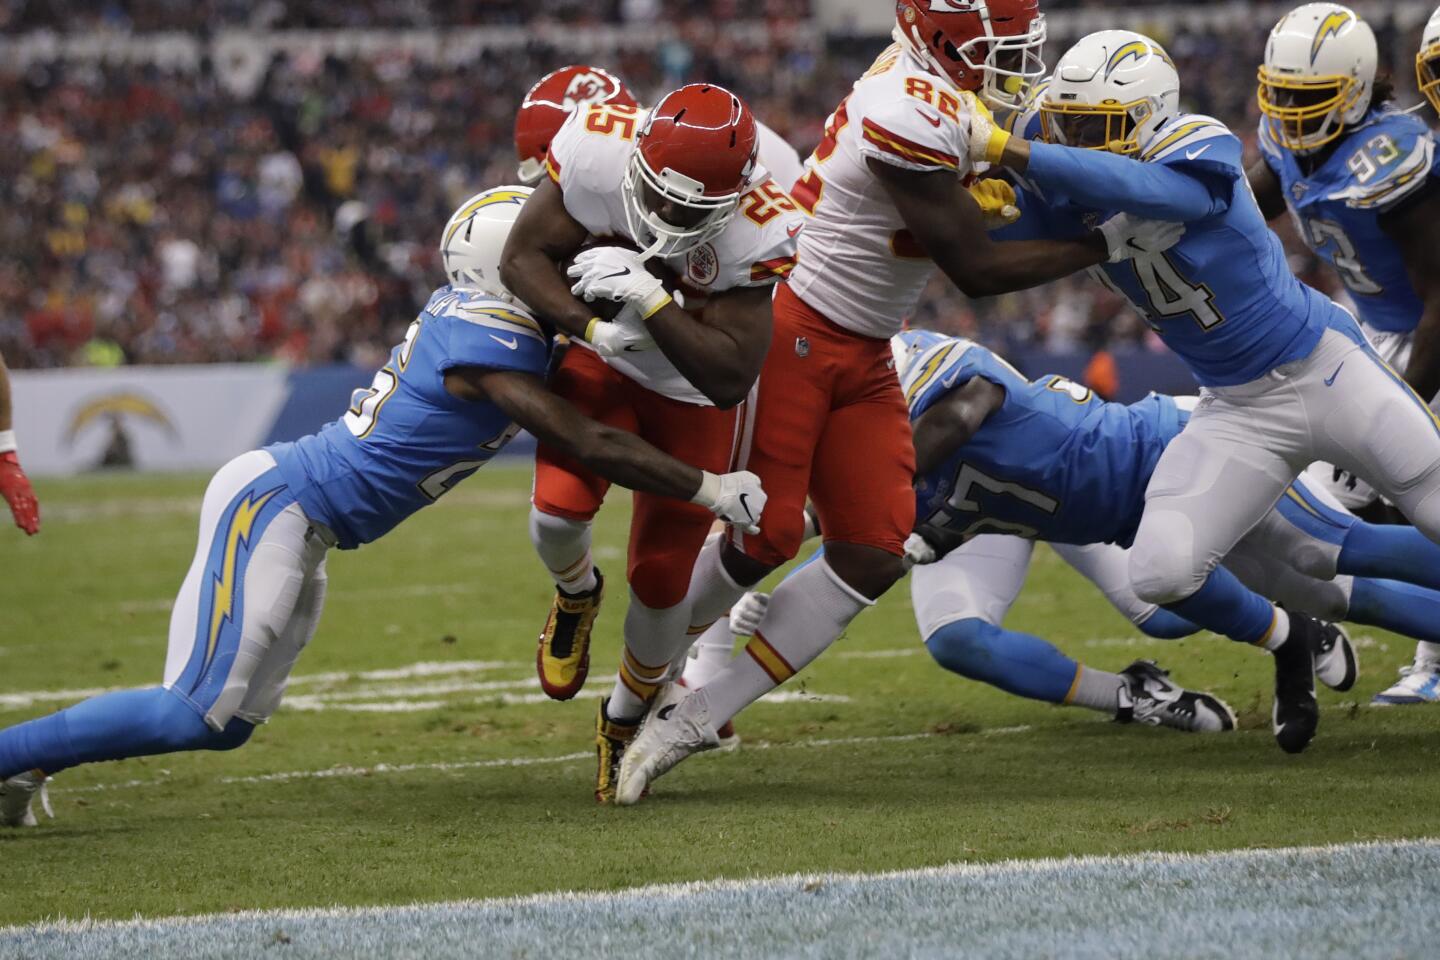 Chiefs running back LeSean McCoy scores a touchdown during the first half of a game against the Chargers in Mexico City.